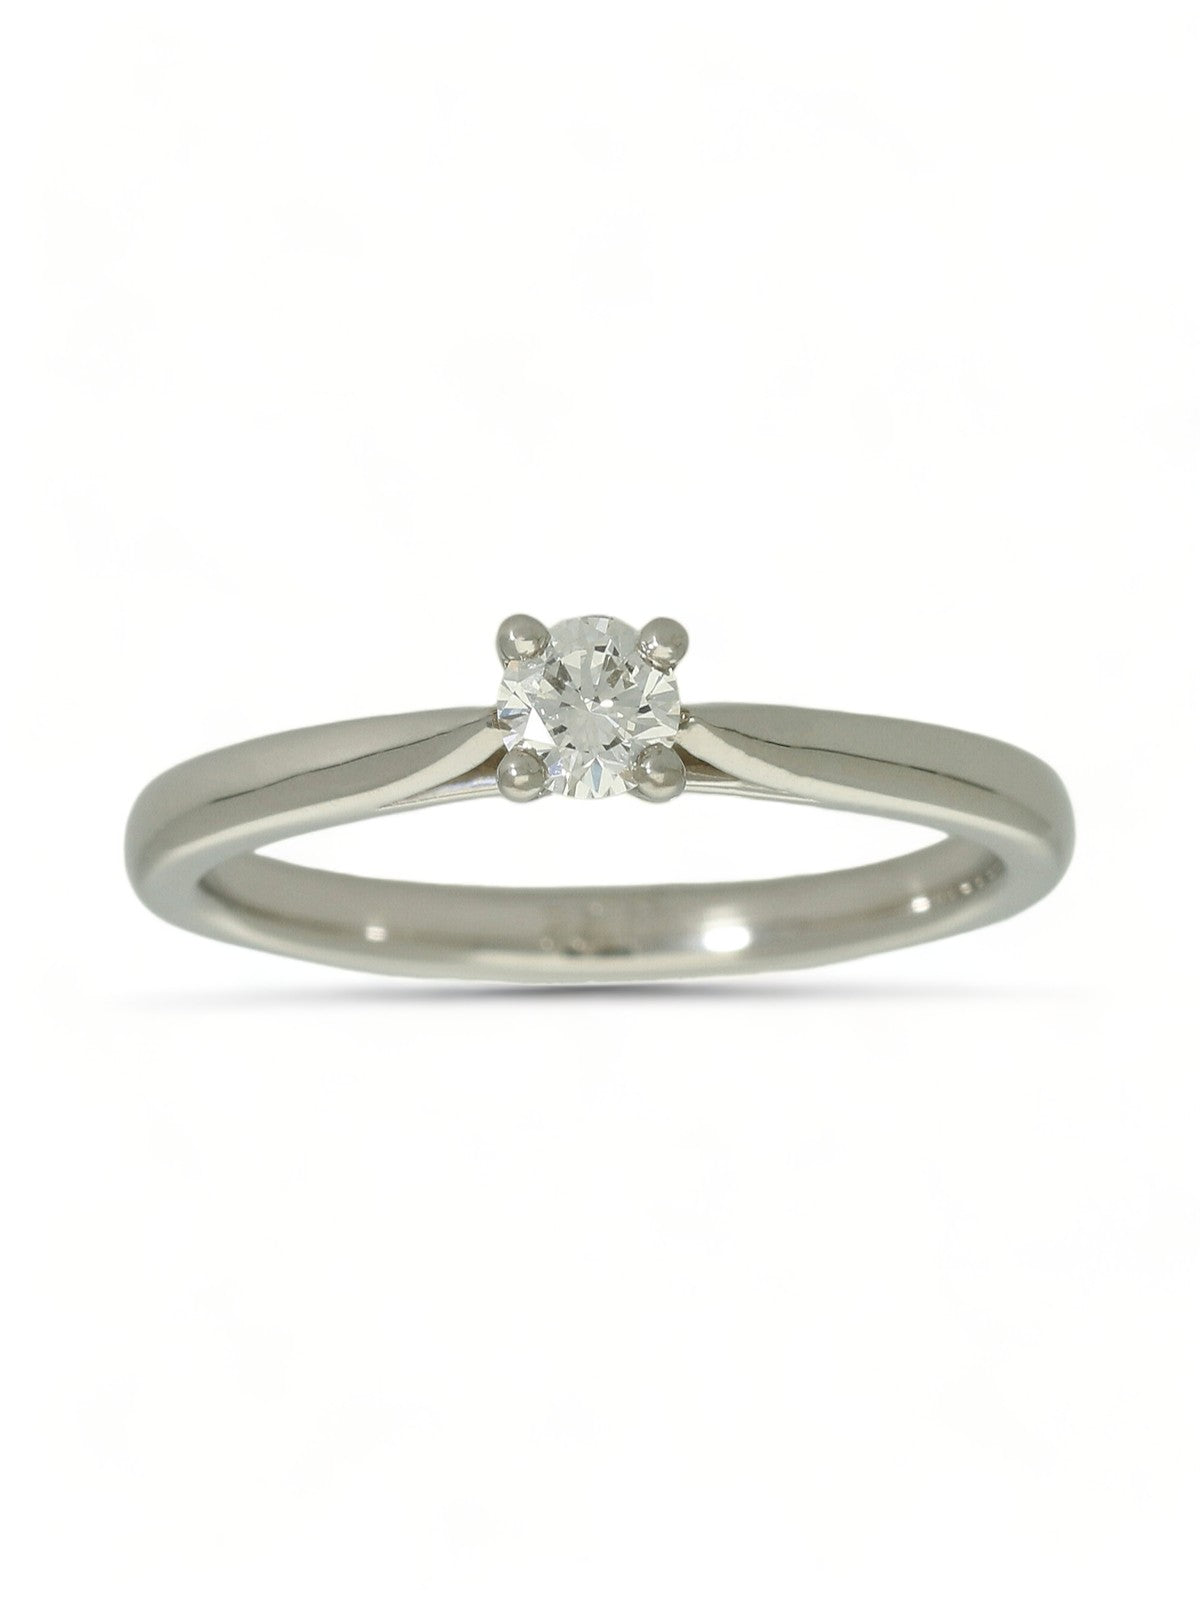 Diamond Solitaire Engagement Ring "The Catherine Collection" 0.20ct Round Brilliant Cut in Platinum